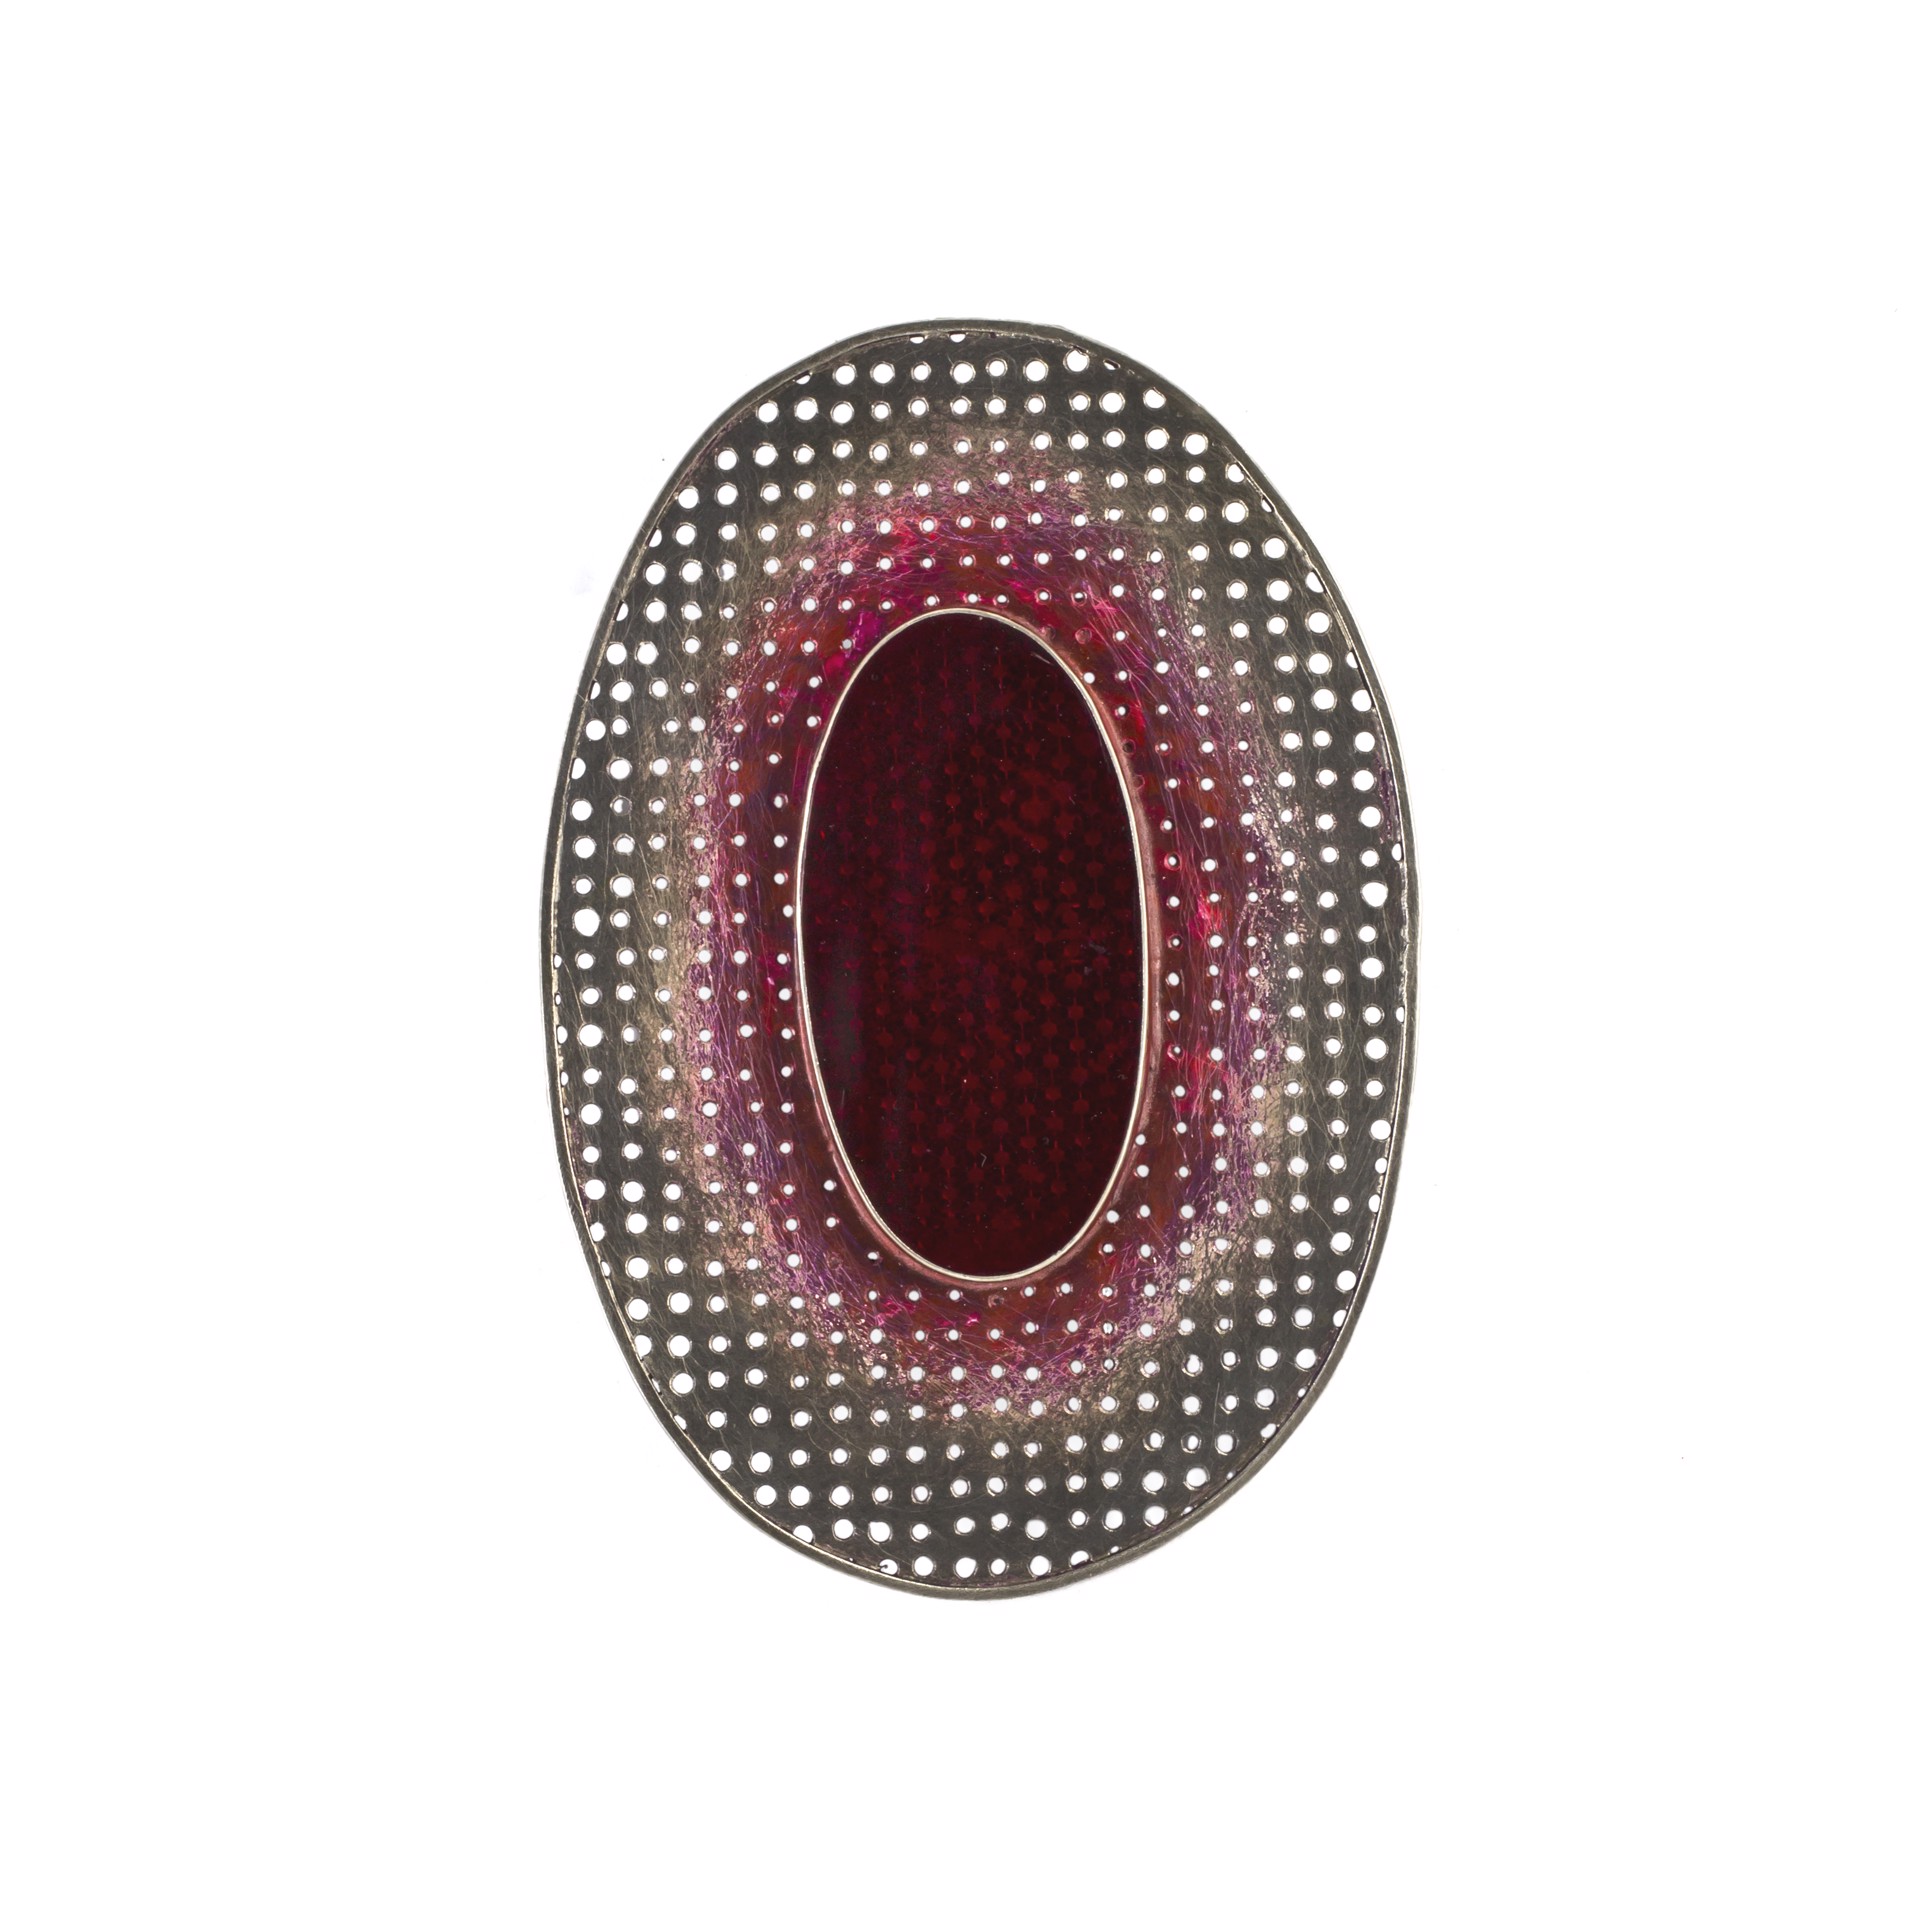 Perforated Brooch, 2014 by Daniel Kruger